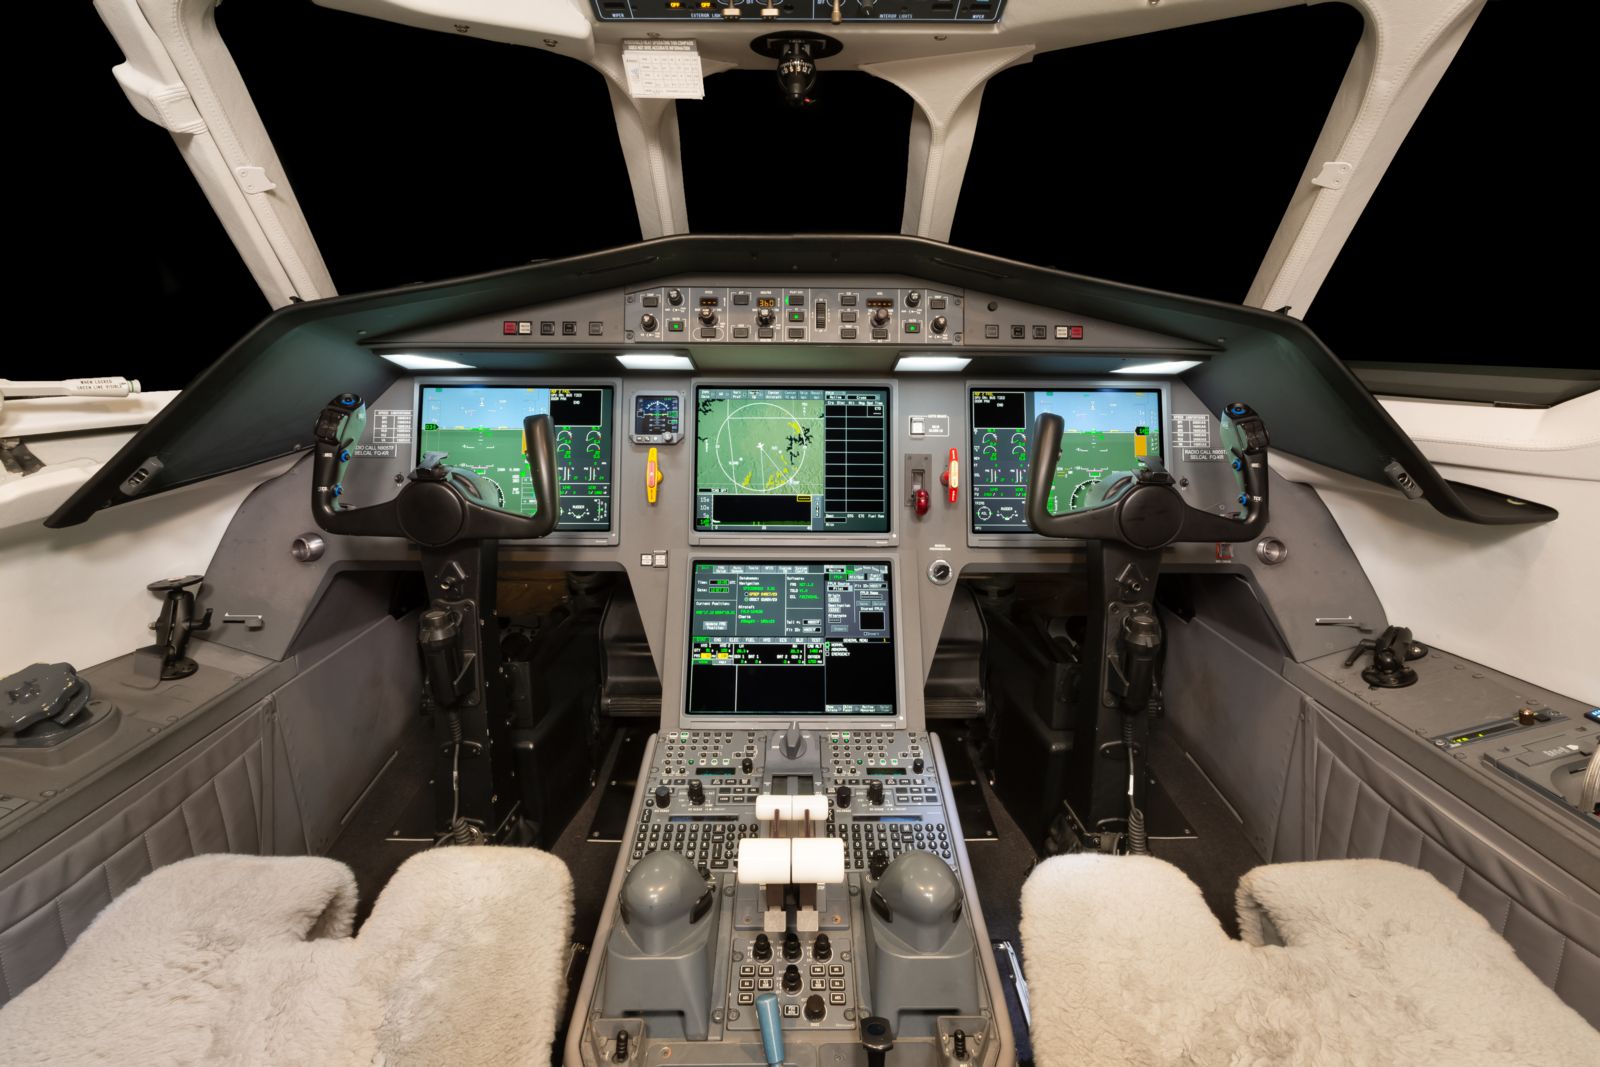 Dassault Falcon 2000LX  S/N 262 for sale | gallery image: /userfiles/files/bfp_5356copy.jpg